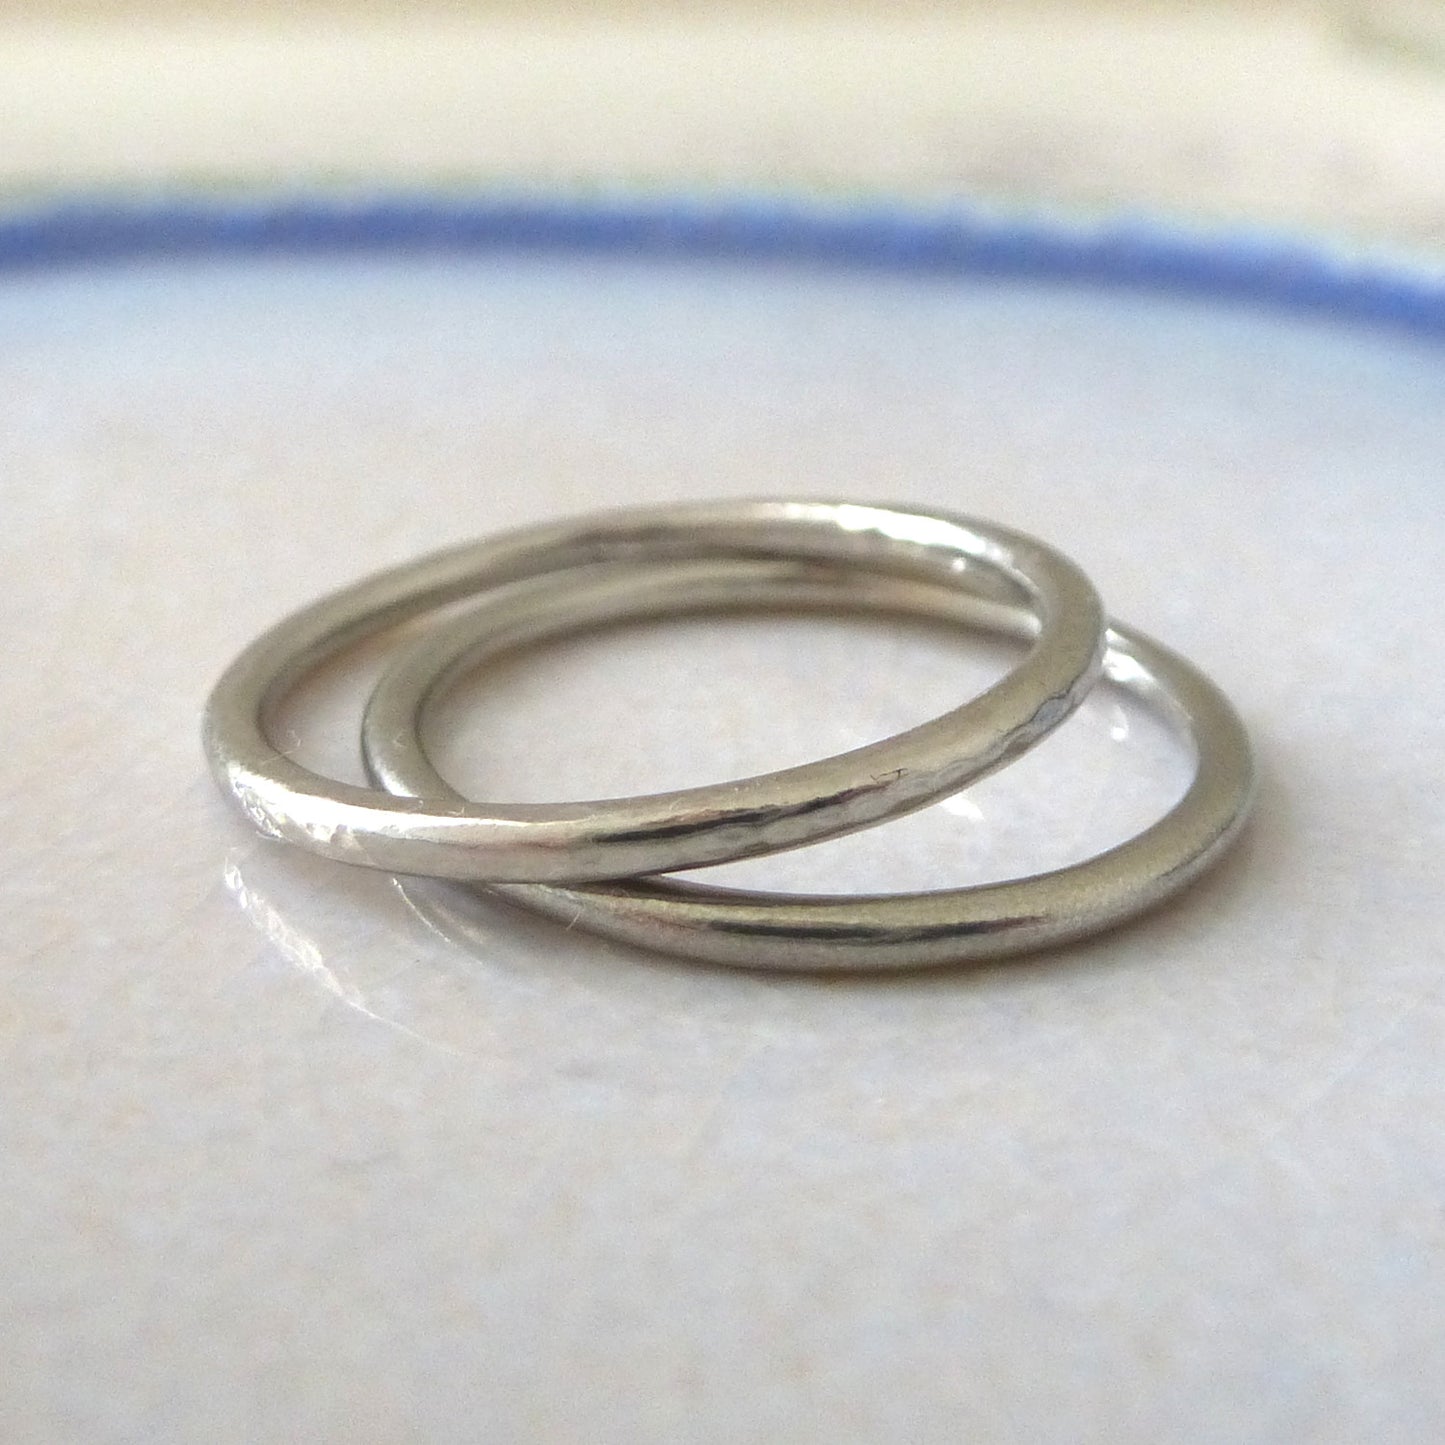 Elegant Band Ring in 18ct White Gold - 1.5mm - Hammered or Smooth